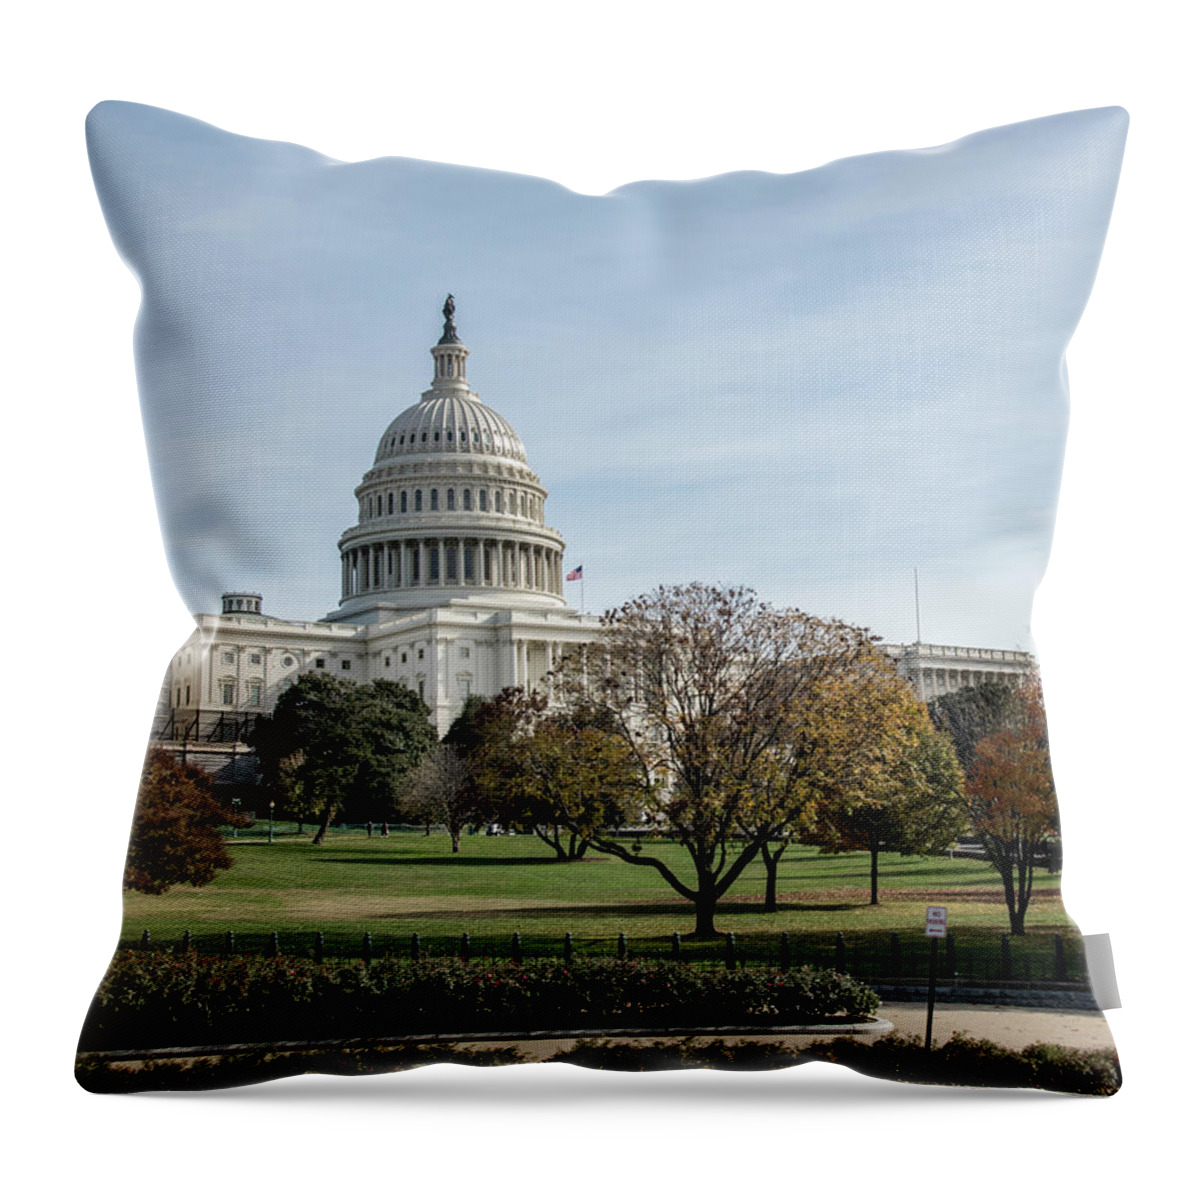 U.s. Capitol Building National Mall In Washington D.c. Throw Pillow featuring the photograph U.S. Capitol Building by Jaime Mercado